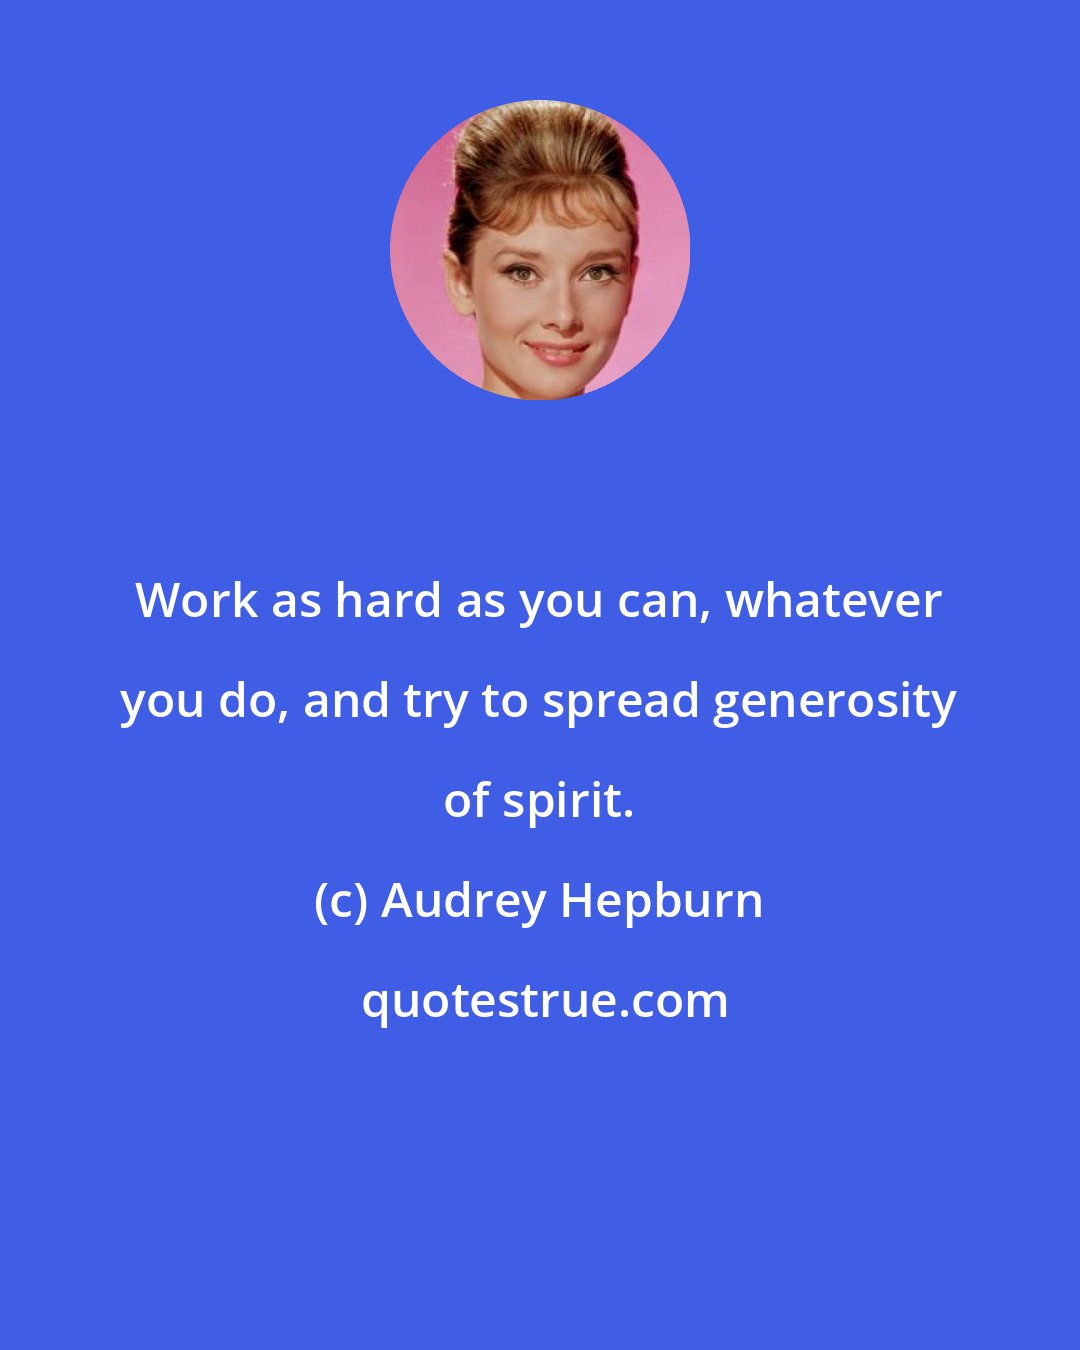 Audrey Hepburn: Work as hard as you can, whatever you do, and try to spread generosity of spirit.